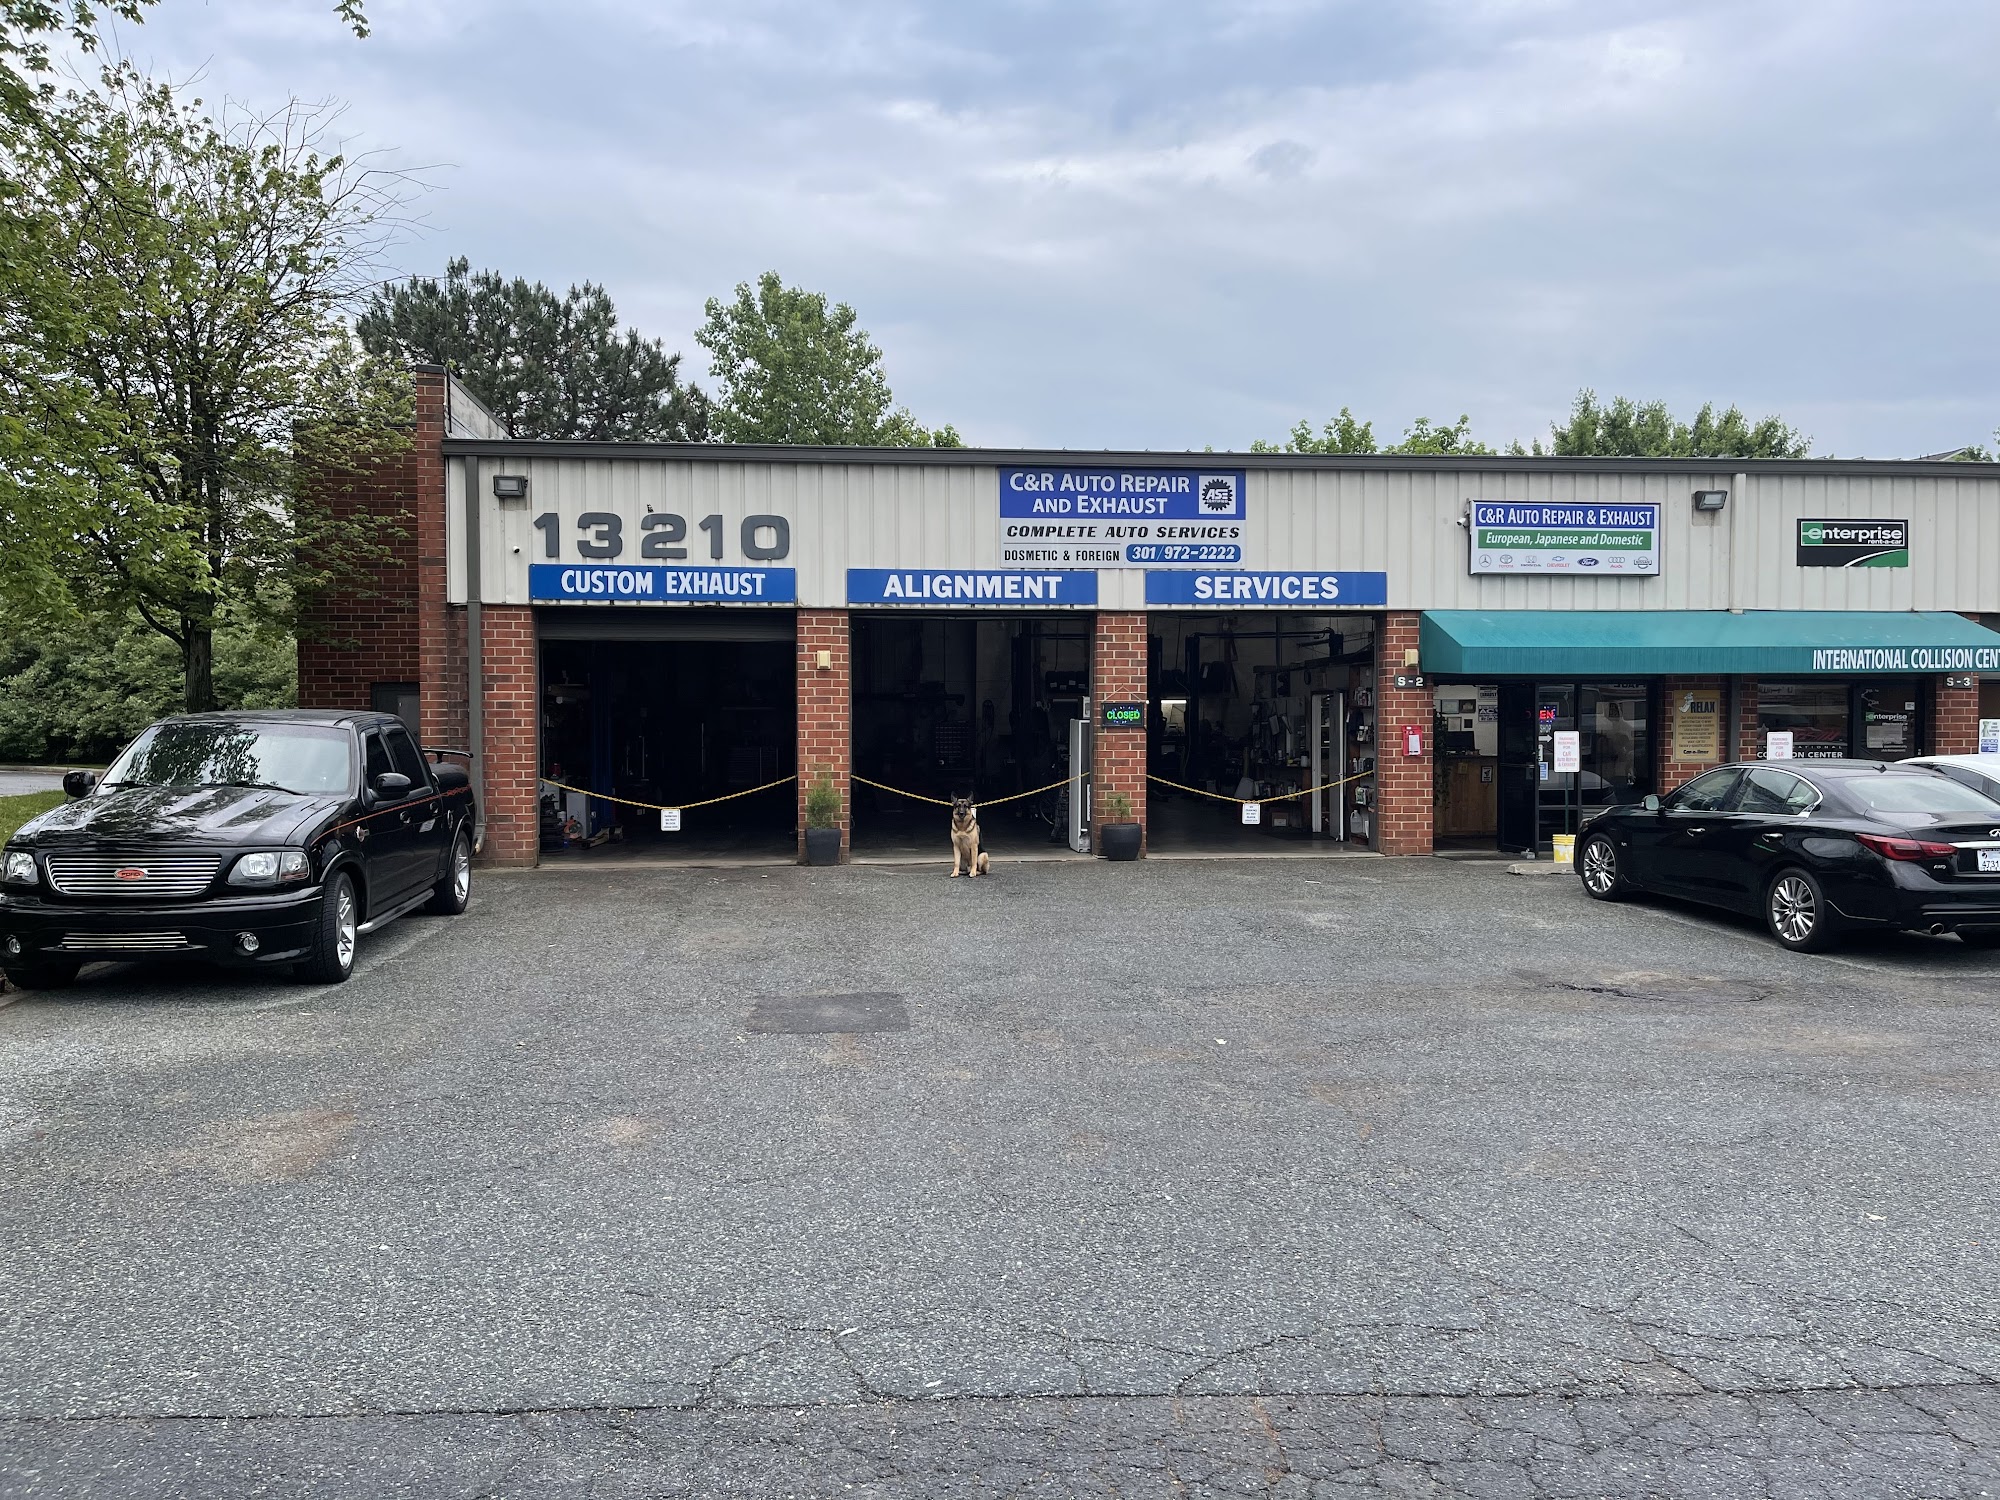 C&R Auto Repair and Exhaust